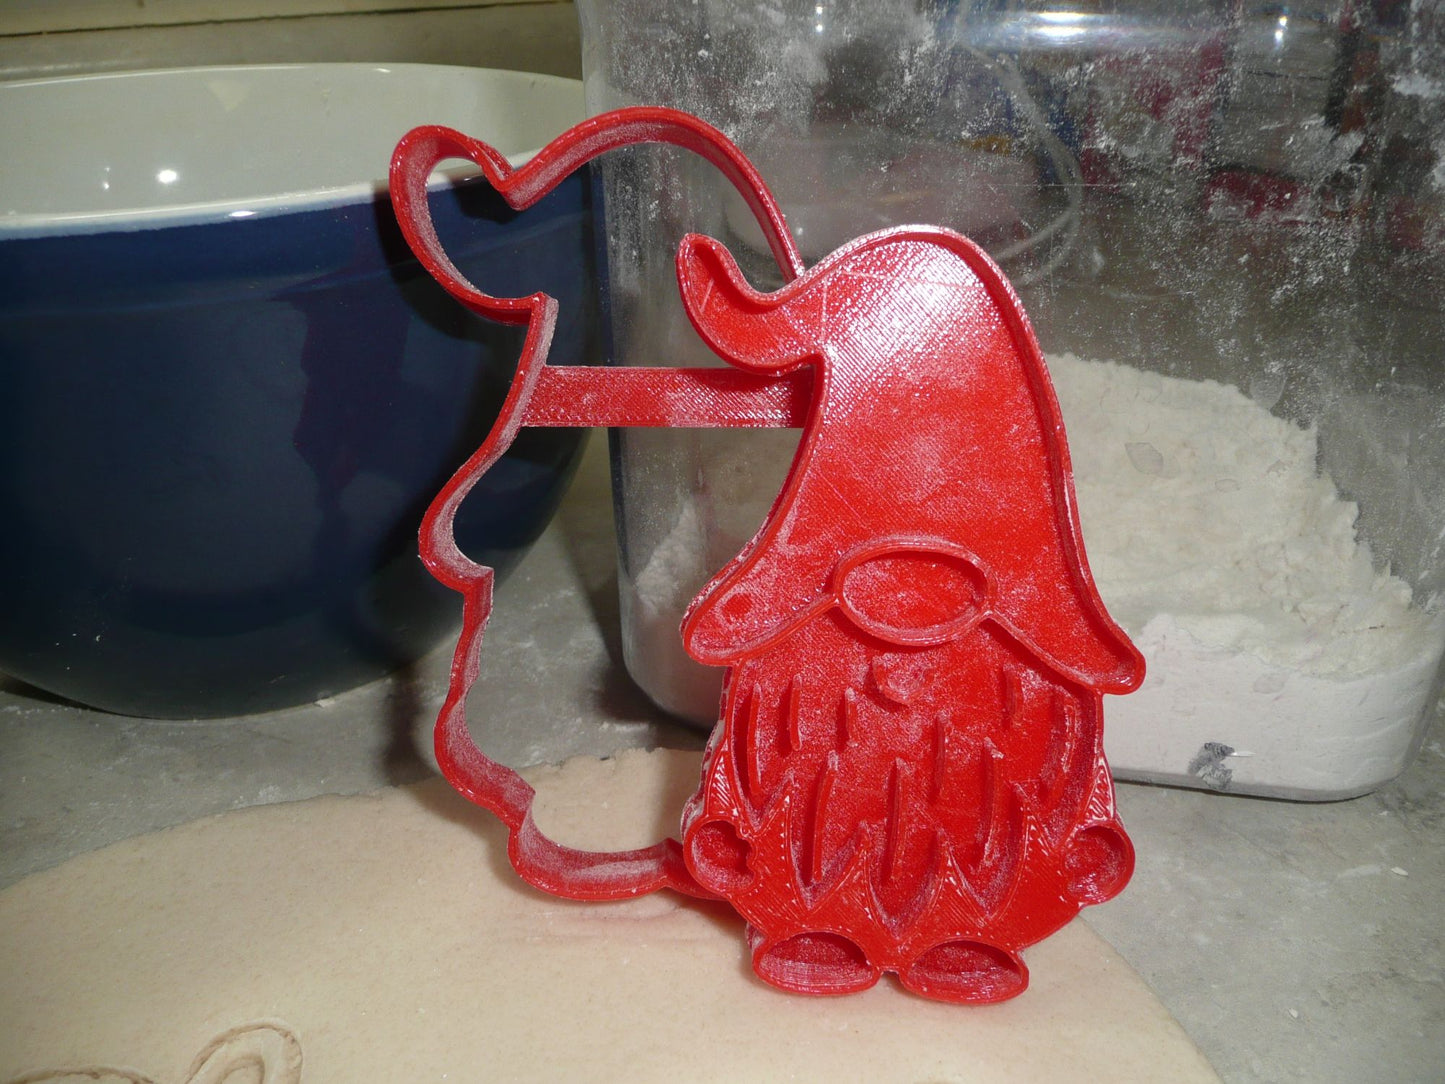 Gnome 3 Garden Mythical Creature Set Of 2 Cookie Cutter And Stamp PR1621